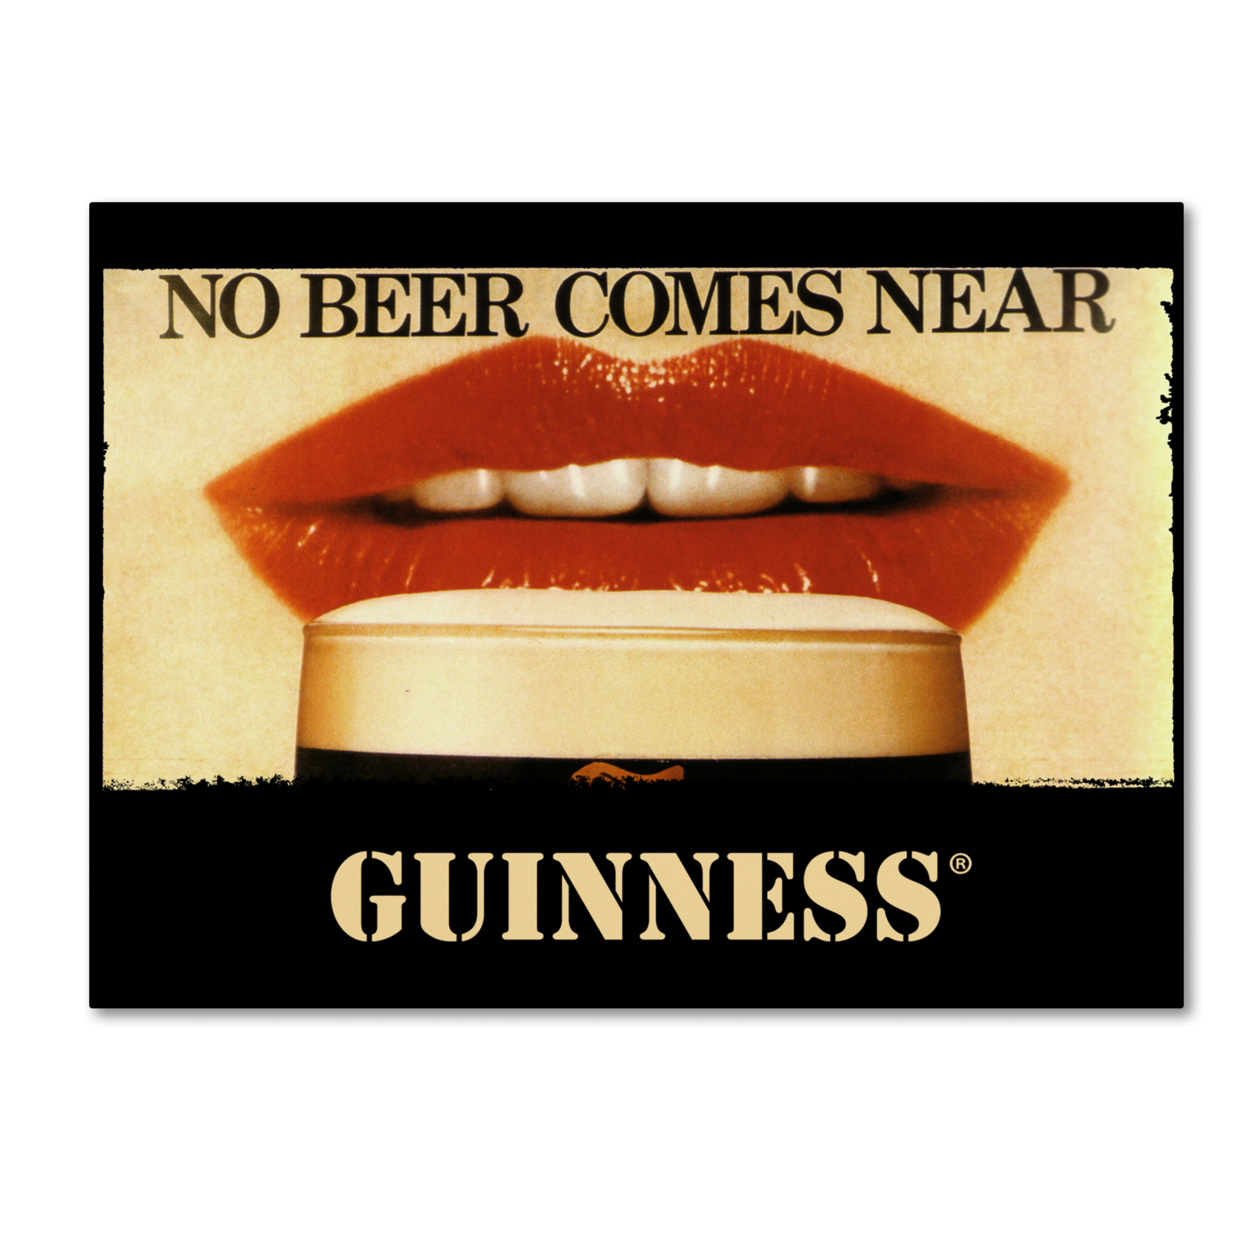 Guinness Brewery 'No Beer Comes Near' Canvas Wall Art 35 X 47 Inches